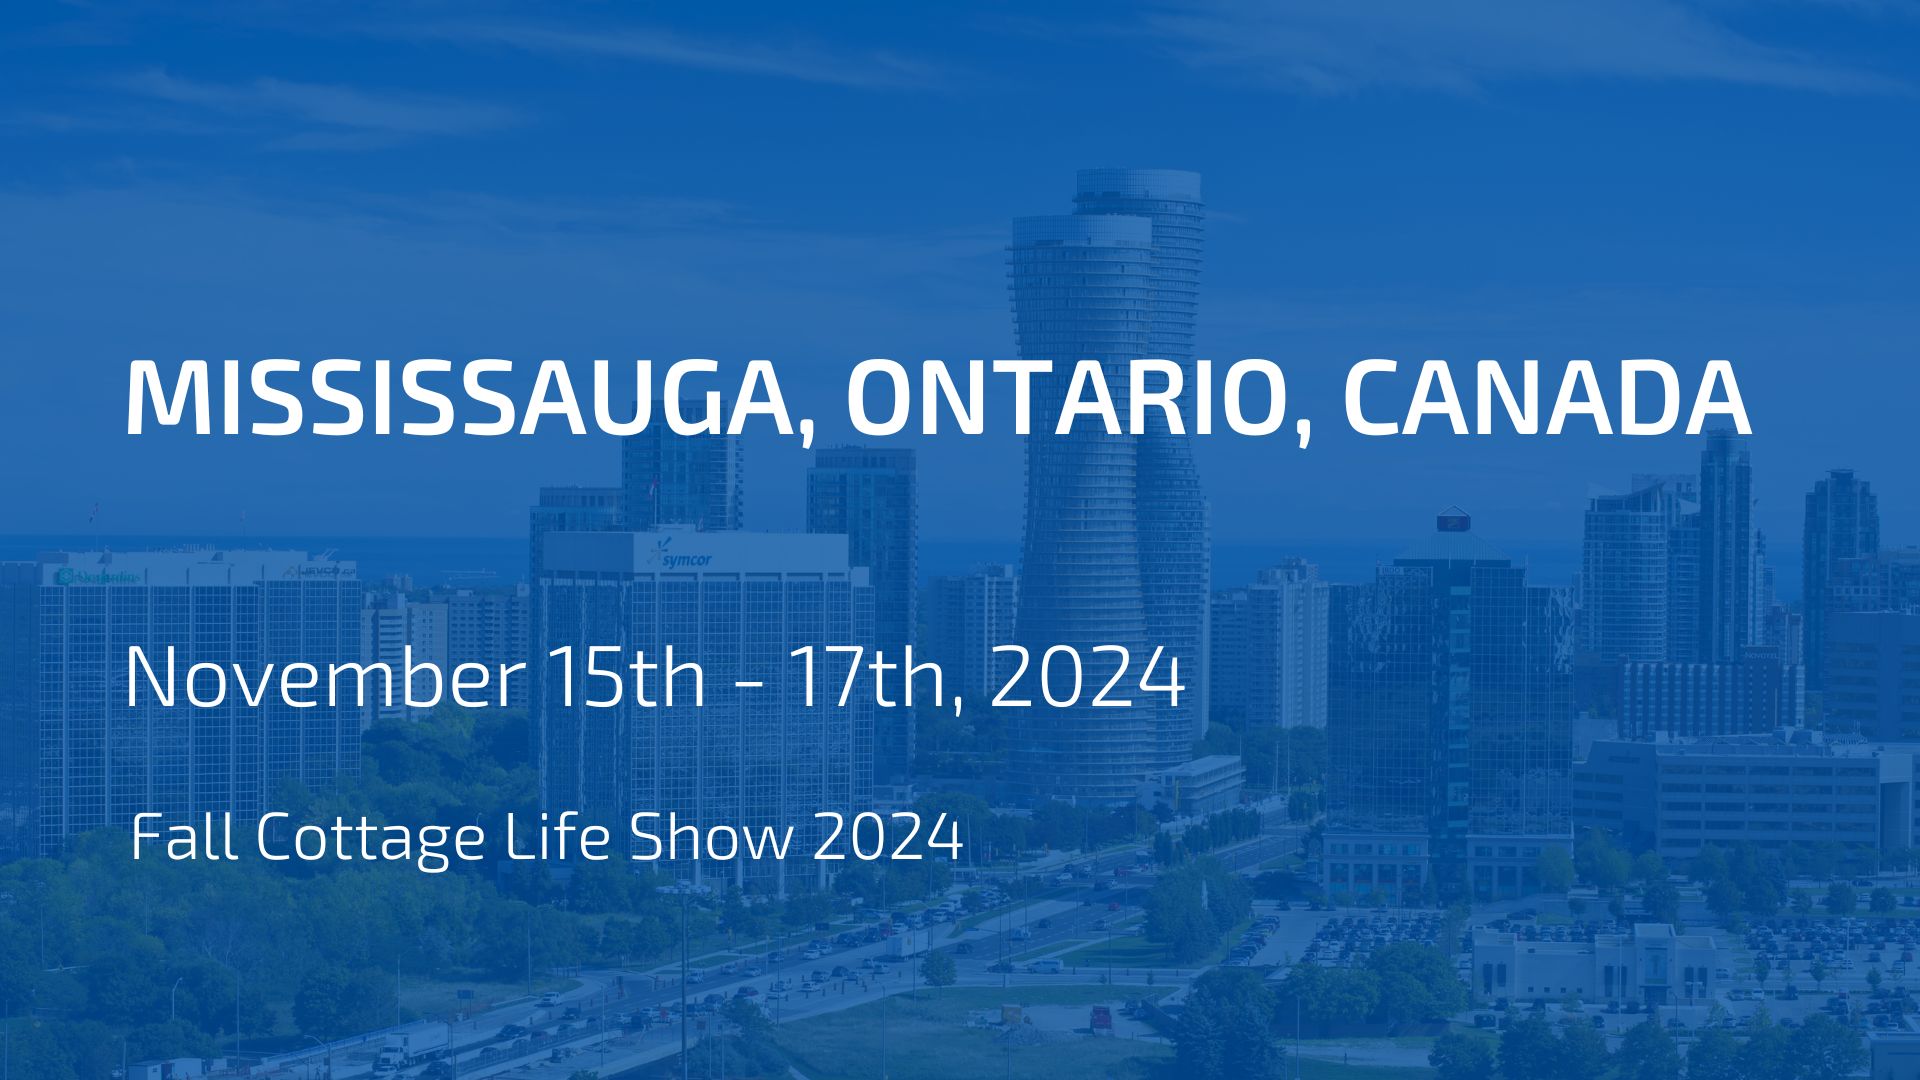 We will be at the Fall Cottage Life show in Mississauga from November 15th-17th